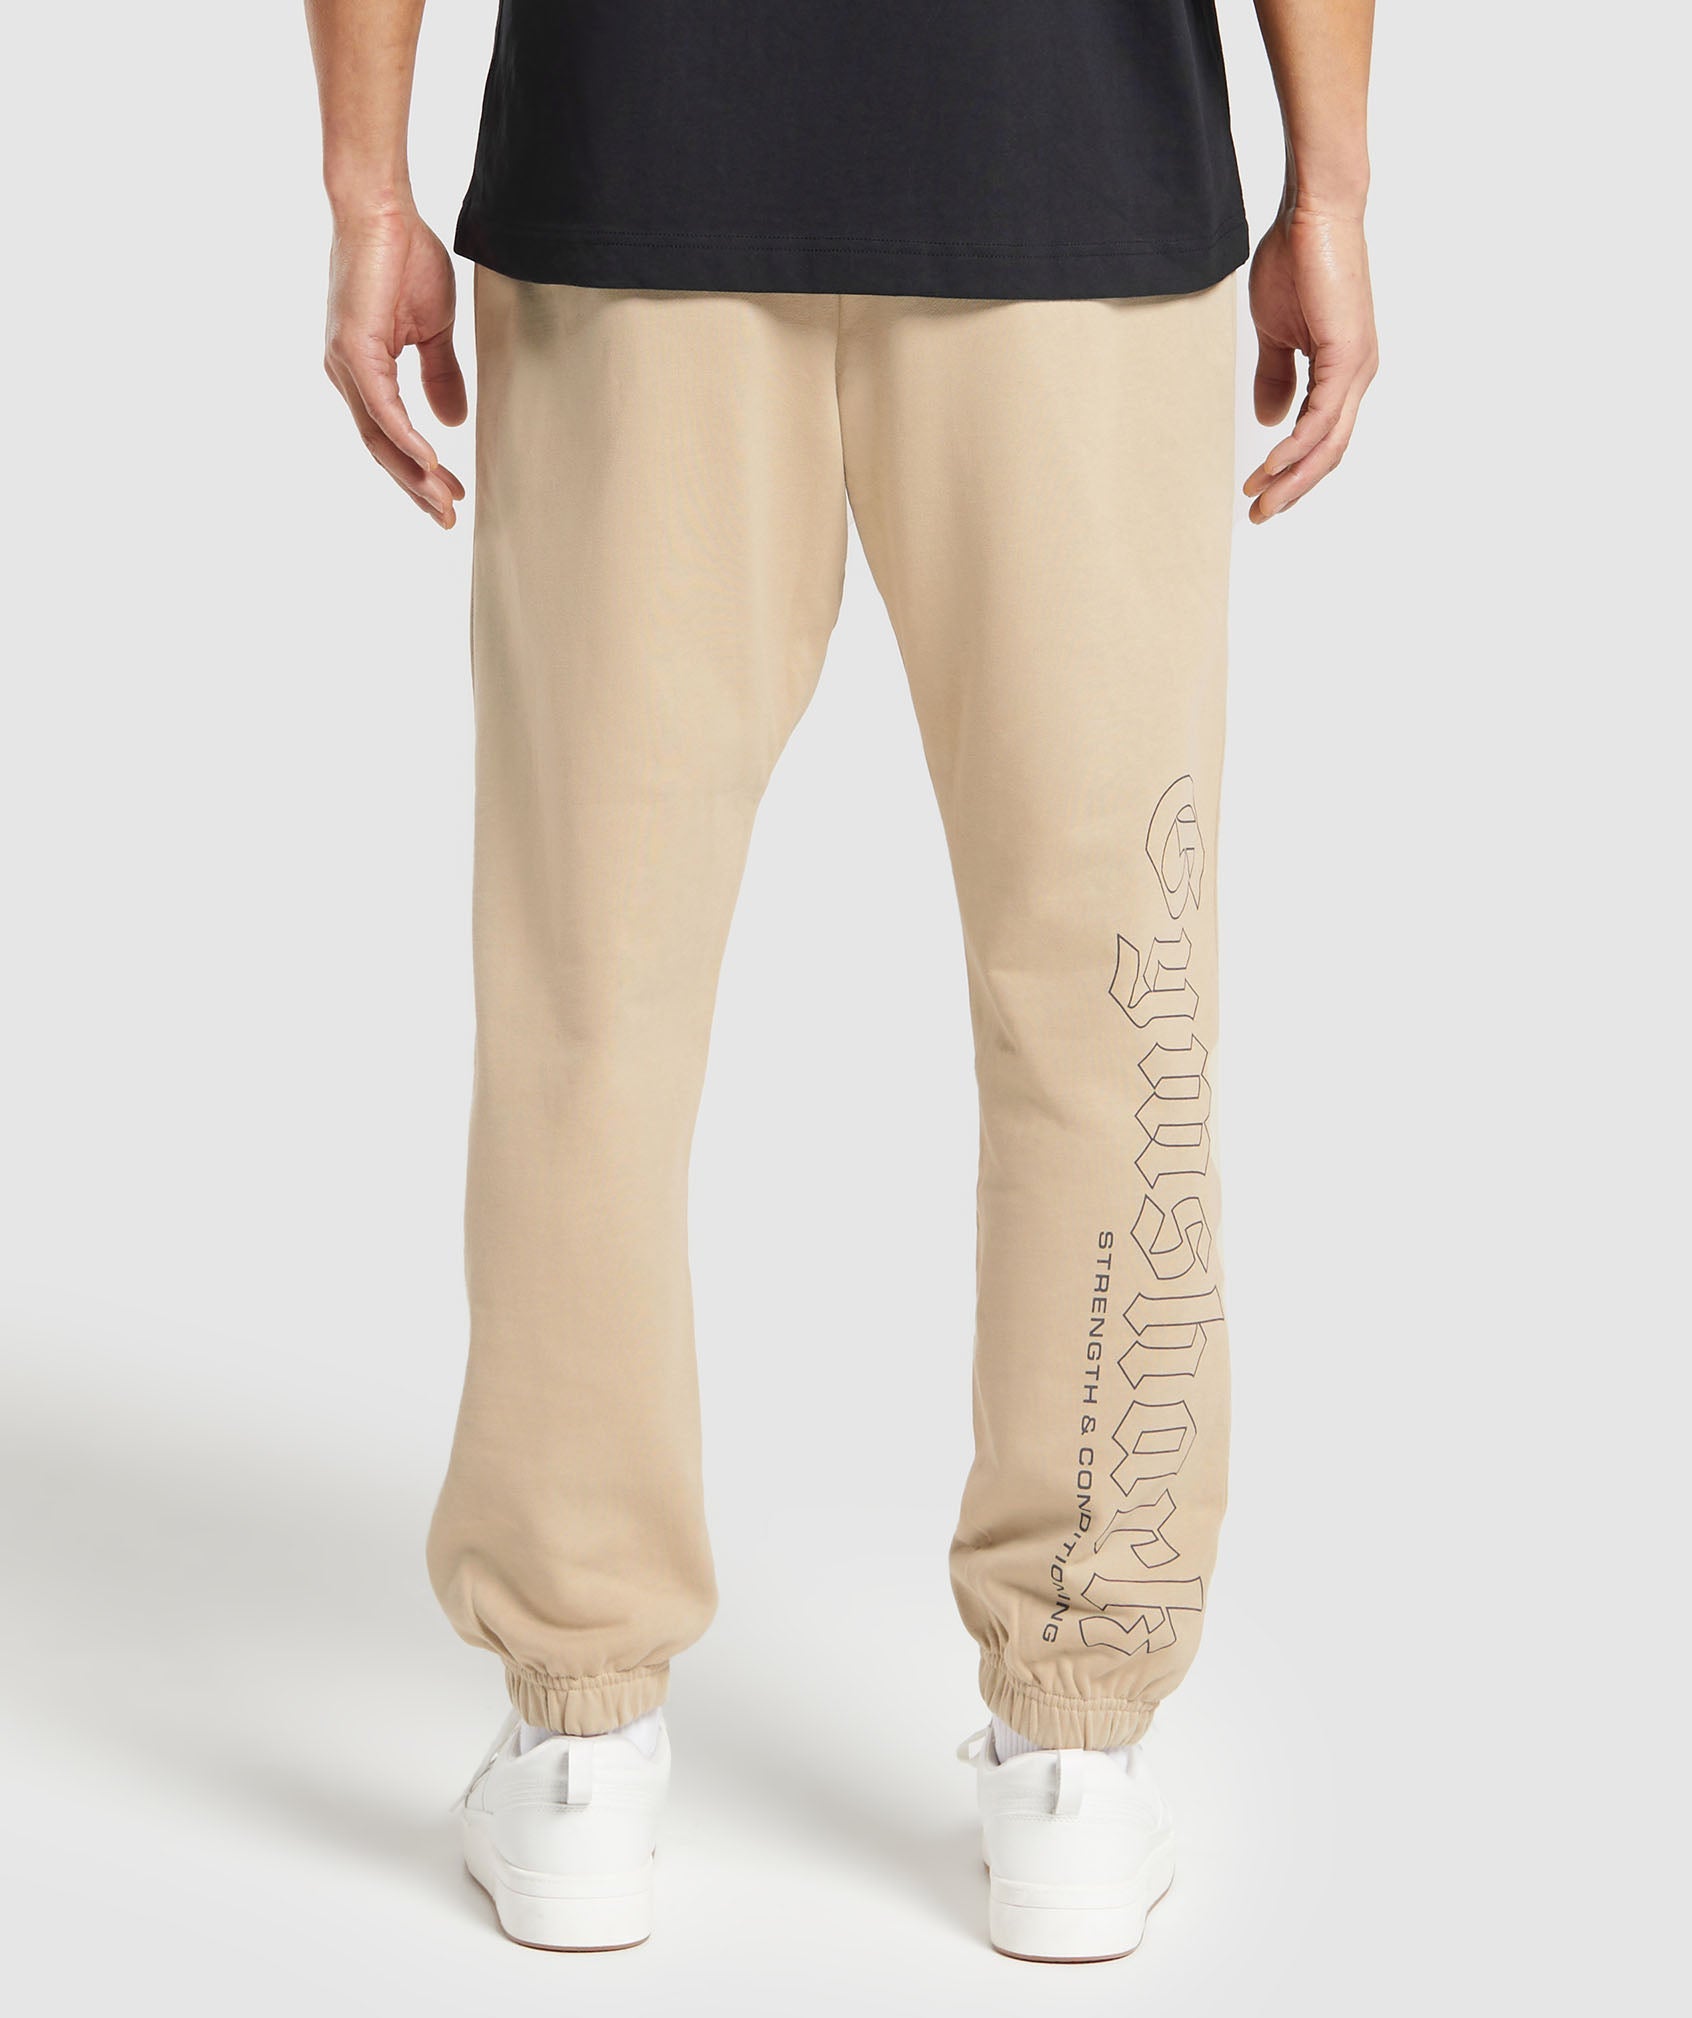 Strength and Conditioning Joggers in Vanilla Beige